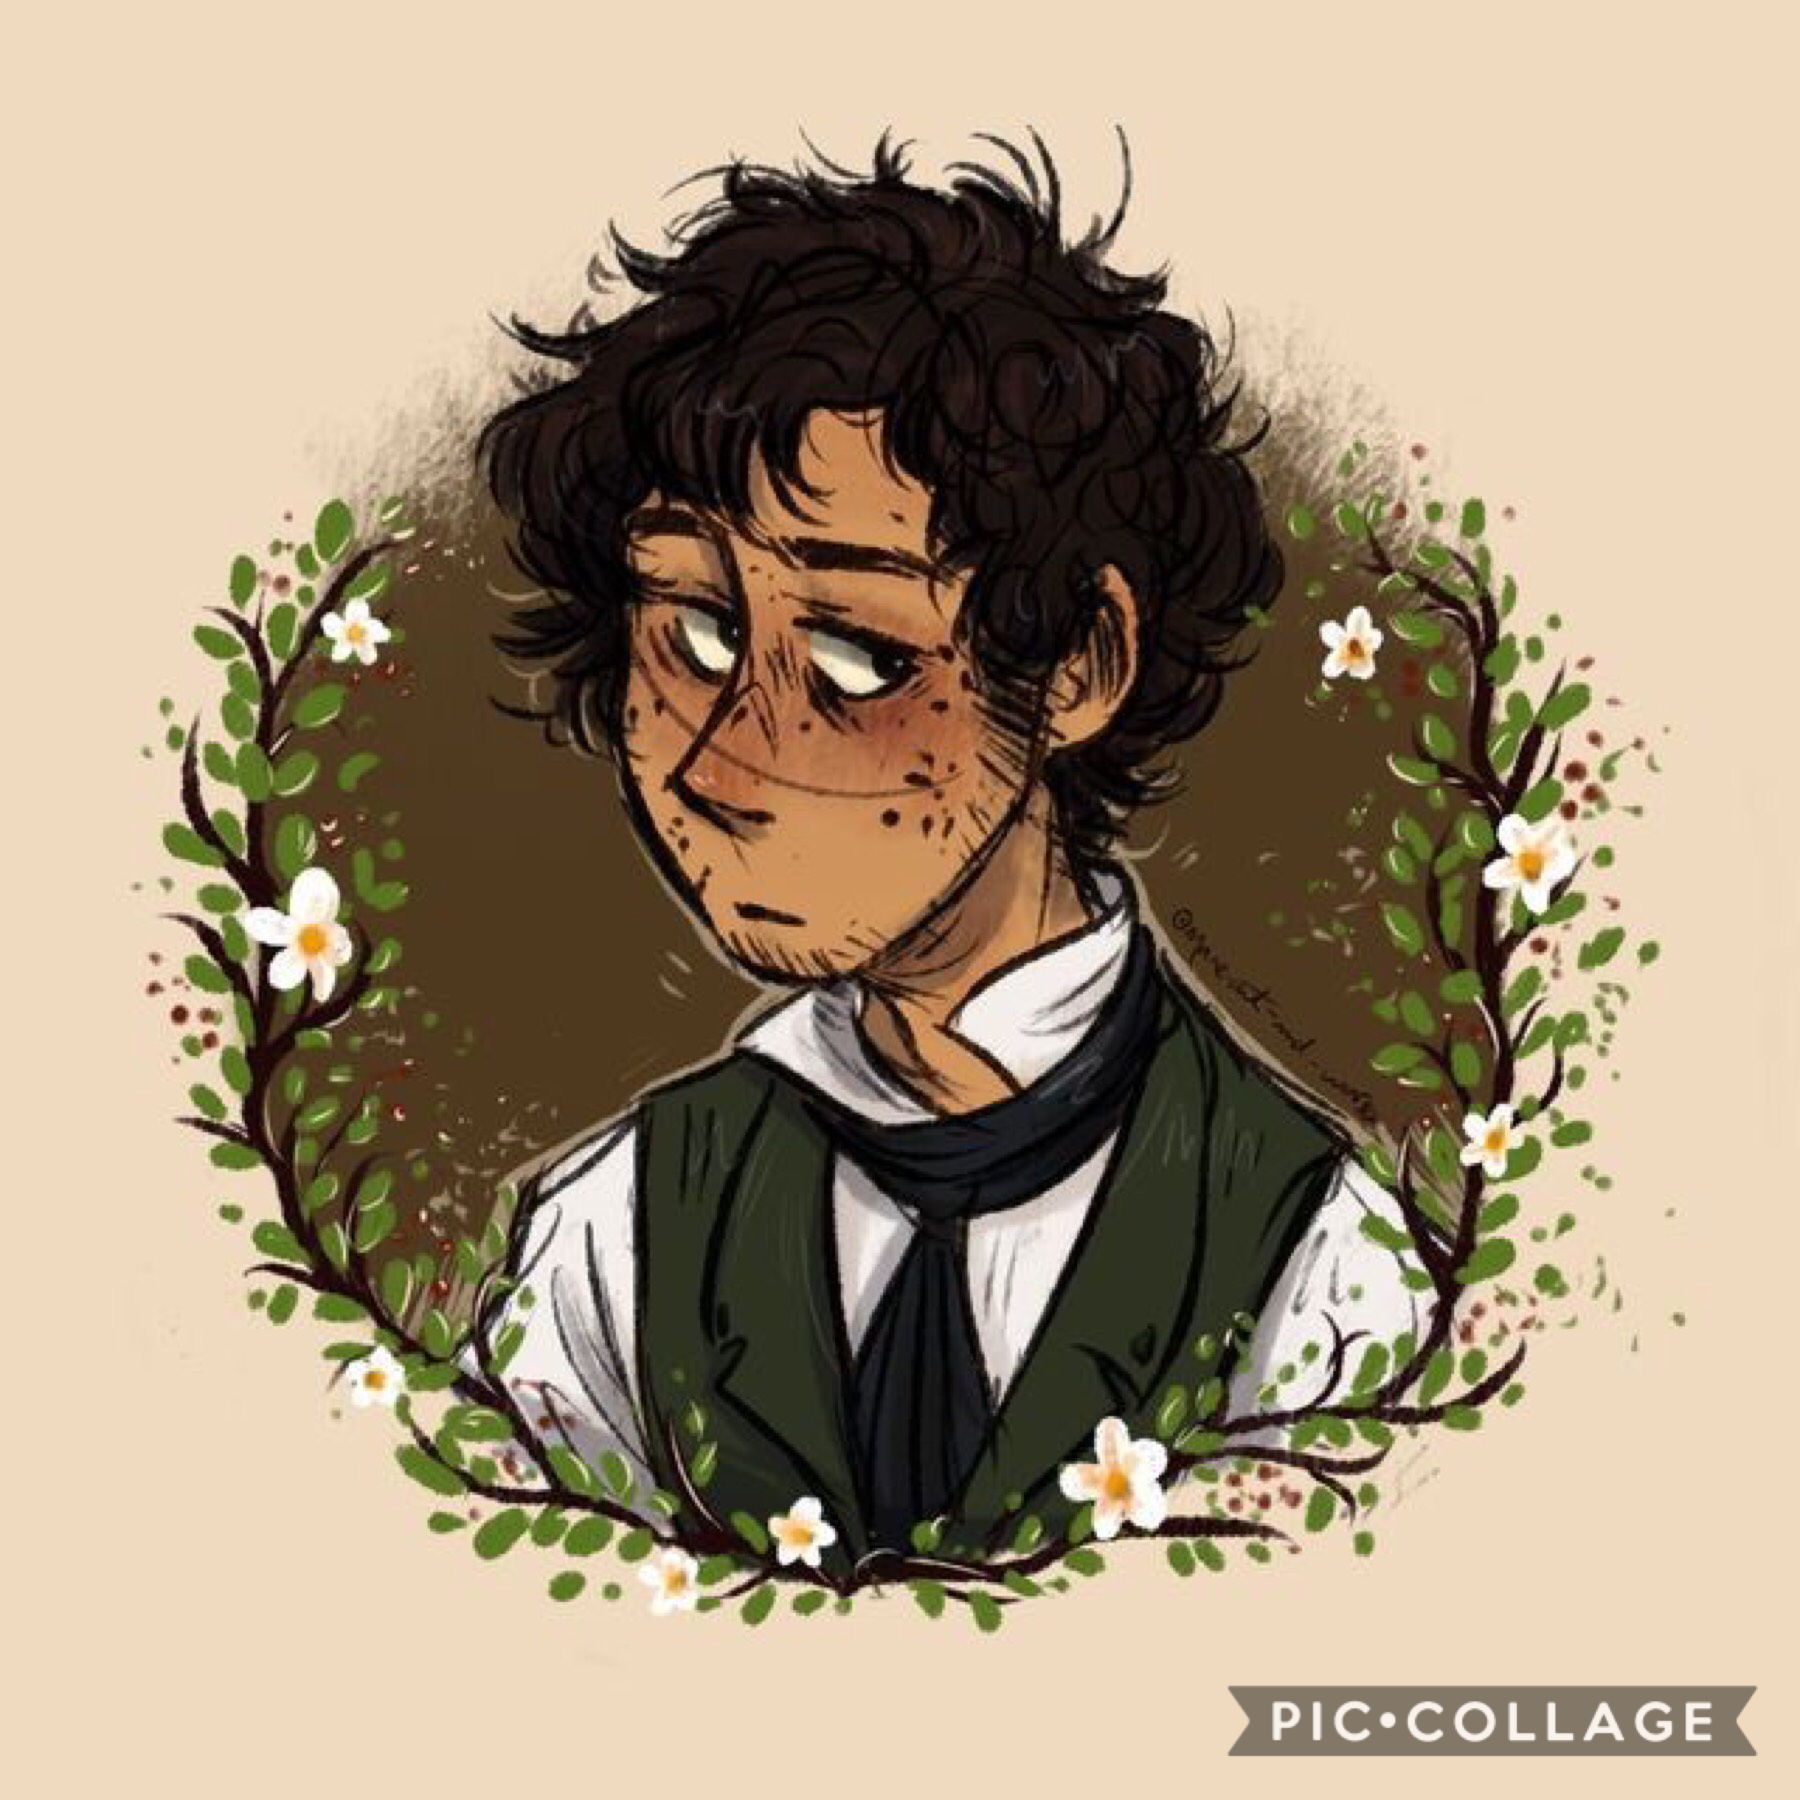 ik no one cares when i post about shît i like that nobody else likes but seriously look at this sad boy oml i love him sm why must he have such a tragic story ahhhhh